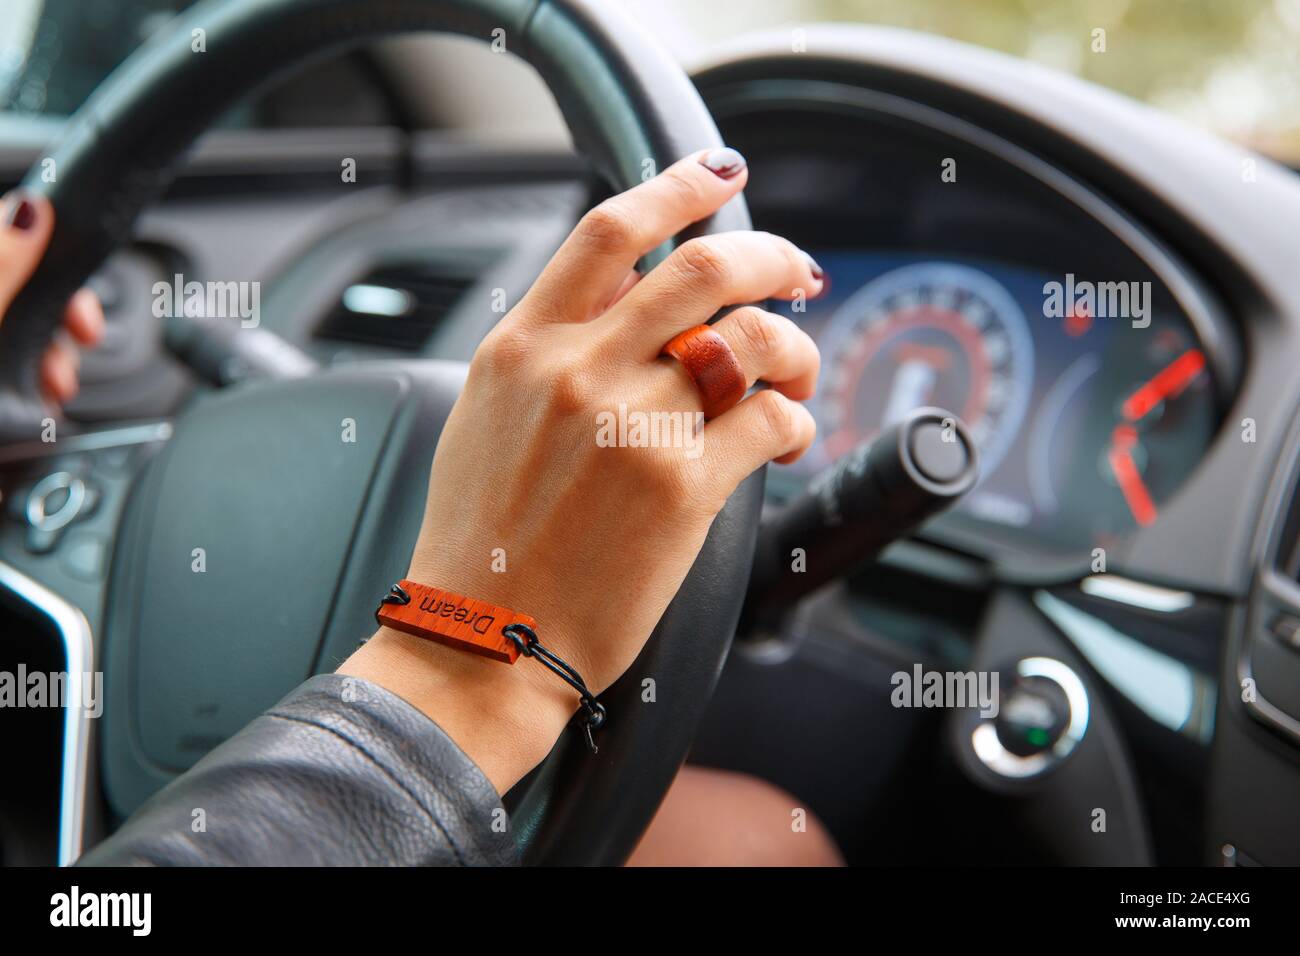 Shooting concept: girl s hands on the steering wheel of a car, a bracelet with the inscription dream on her hand. Stock Photo